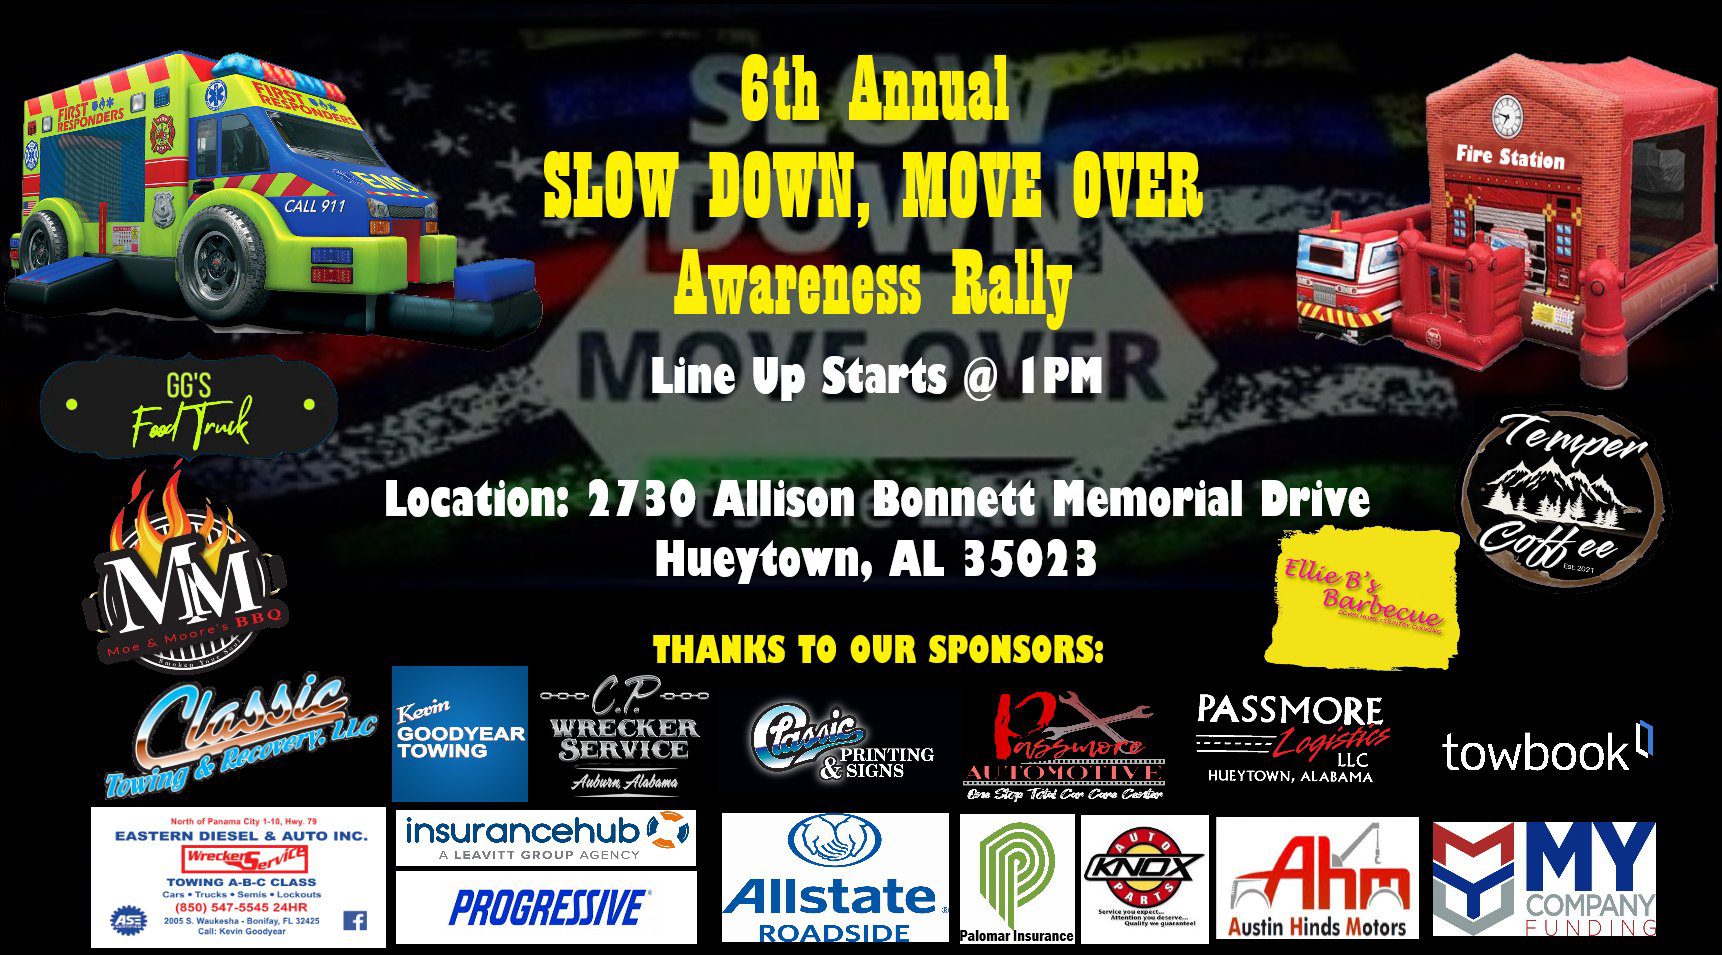 6th Annual Slow Sown, Move Over Awareness Rally - Hueytown, AL